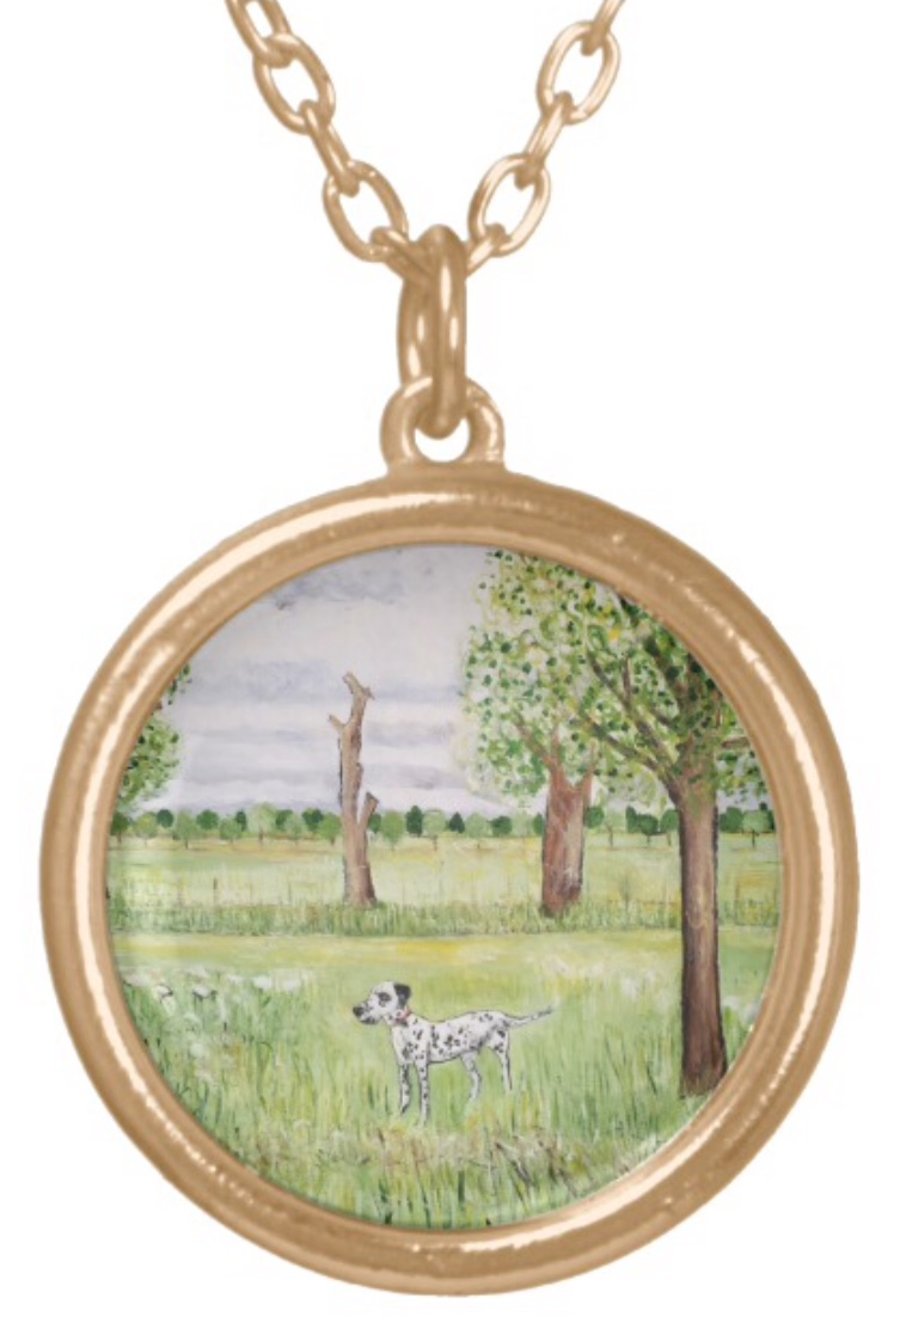 Beautiful Pendant featuring the design ‘Midsummer In The Park’